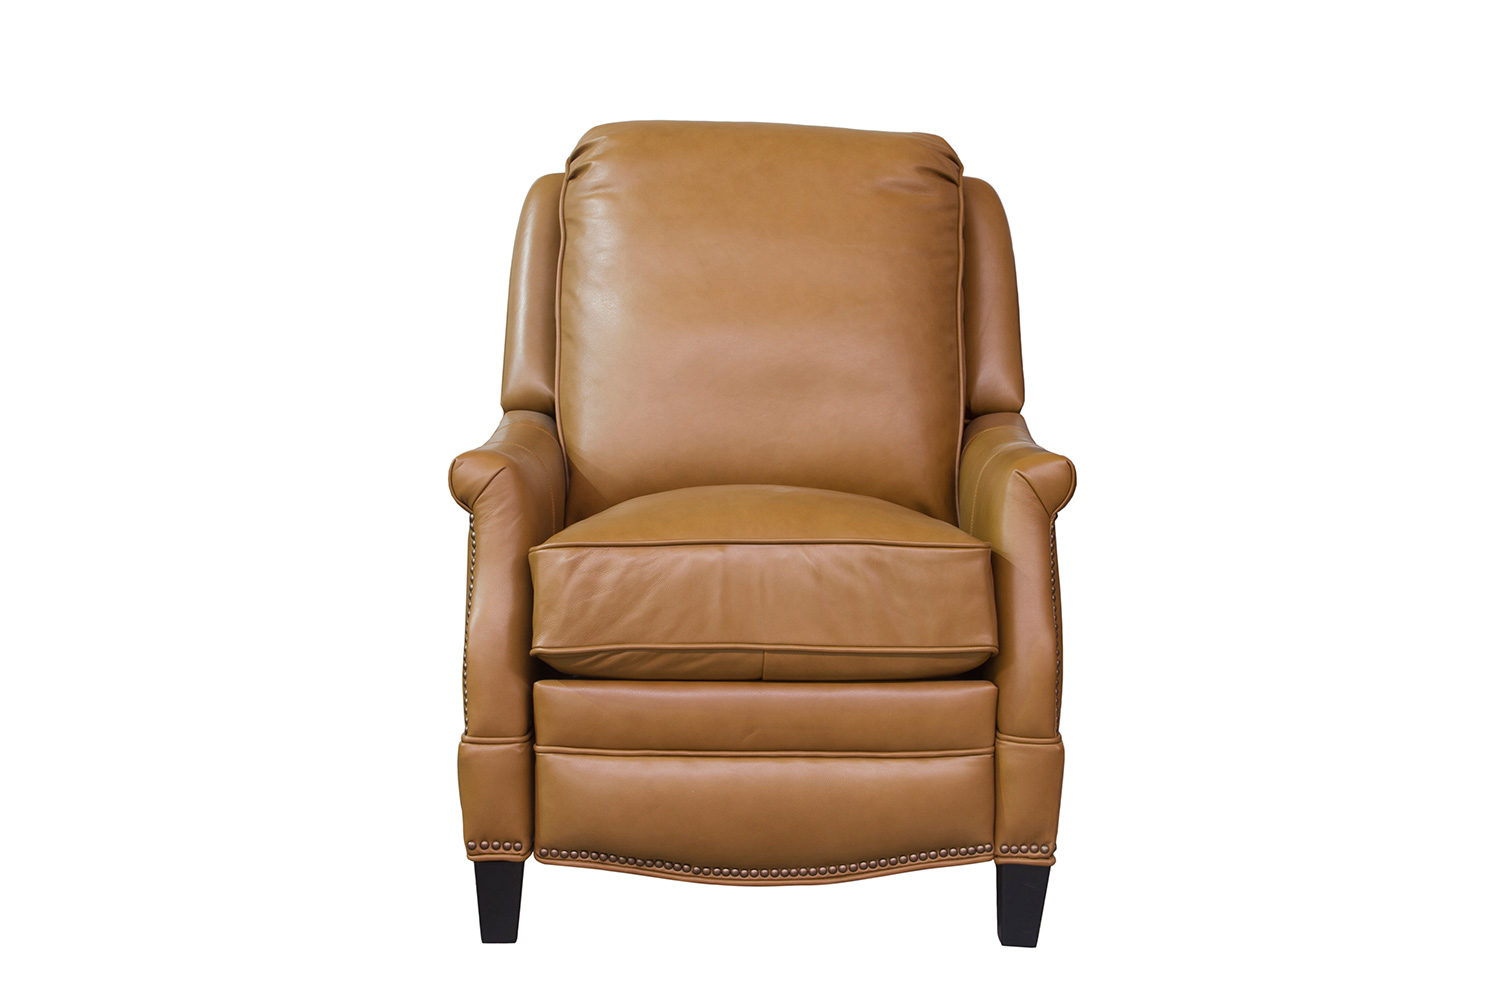 Barcalounger Ashebrooke Recliner Chair - Shoreham Ponytail/All Leather